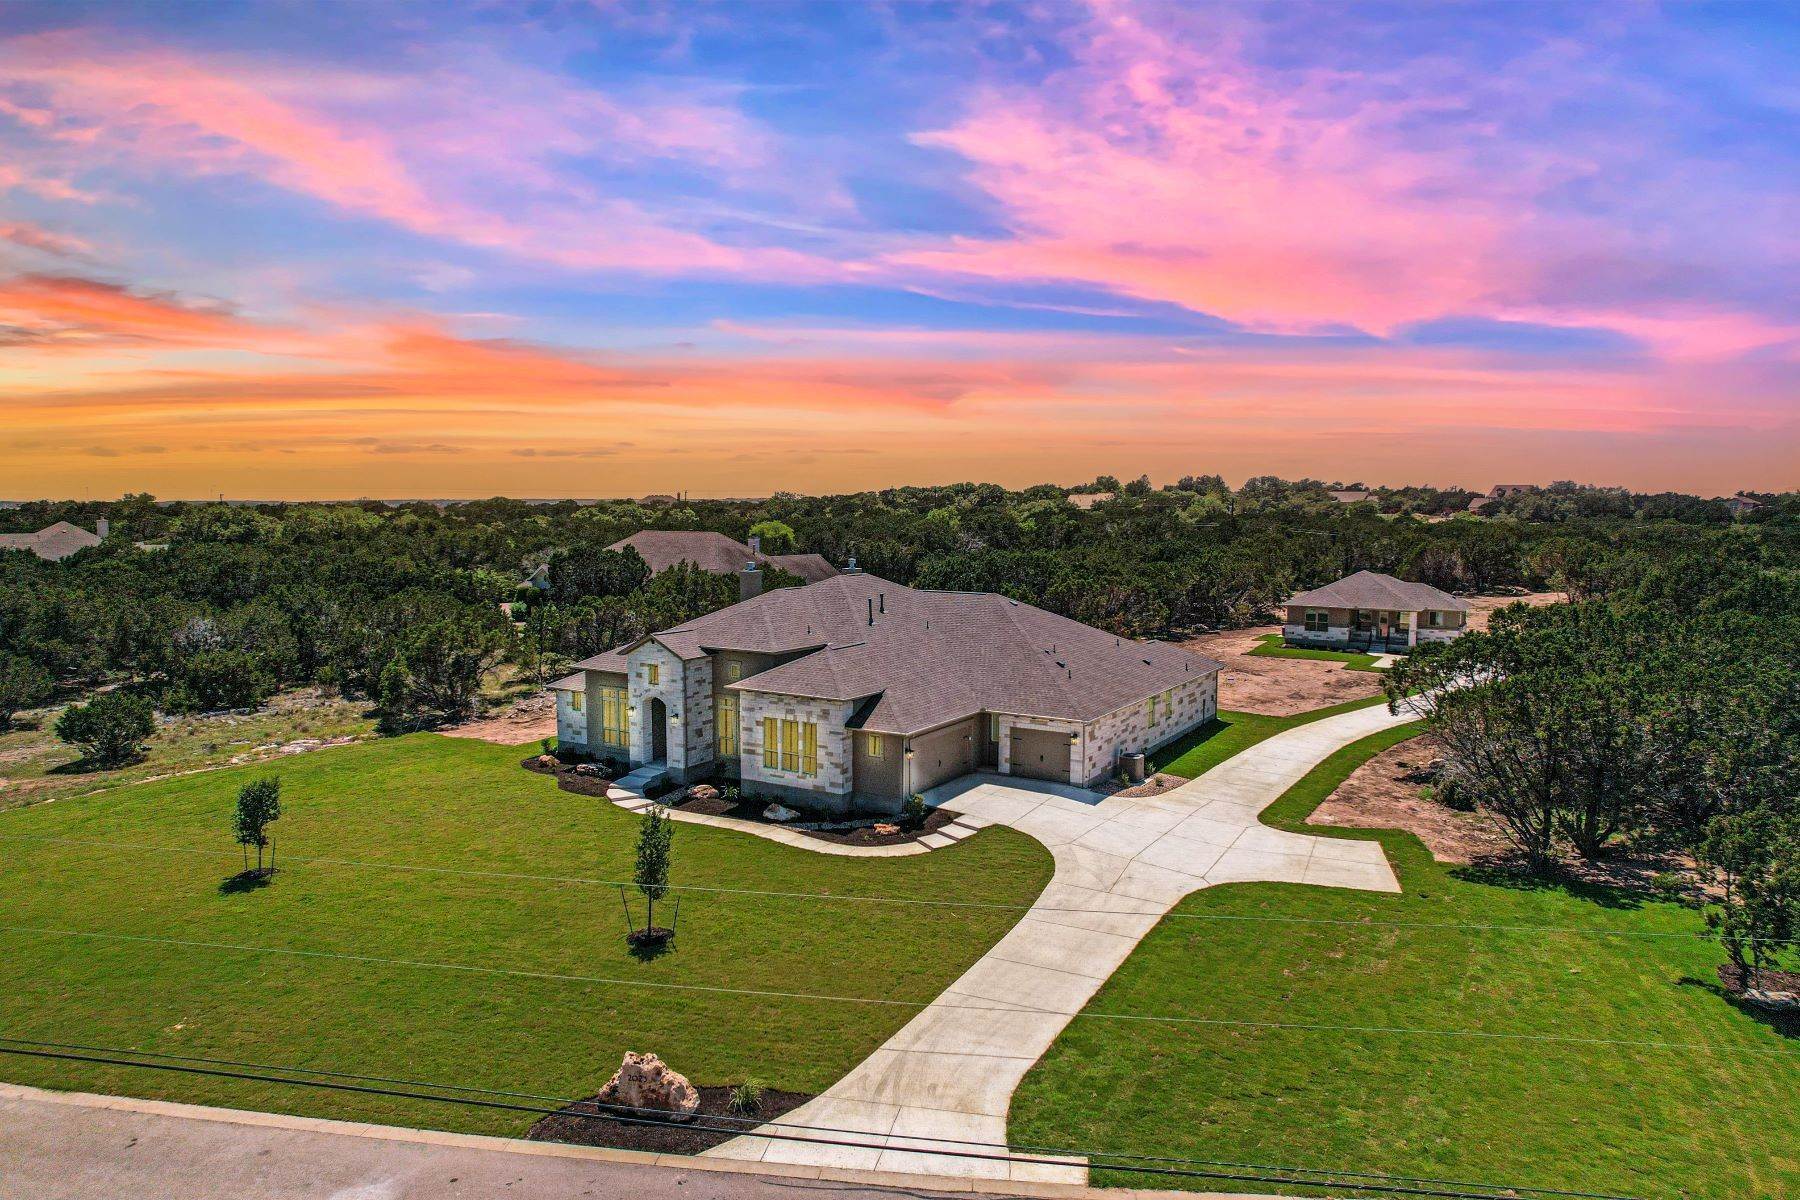 Single Family Homes for Sale at New Construction on 2.6 Acres 2023 Palos Verdes Leander, Texas 78641 United States